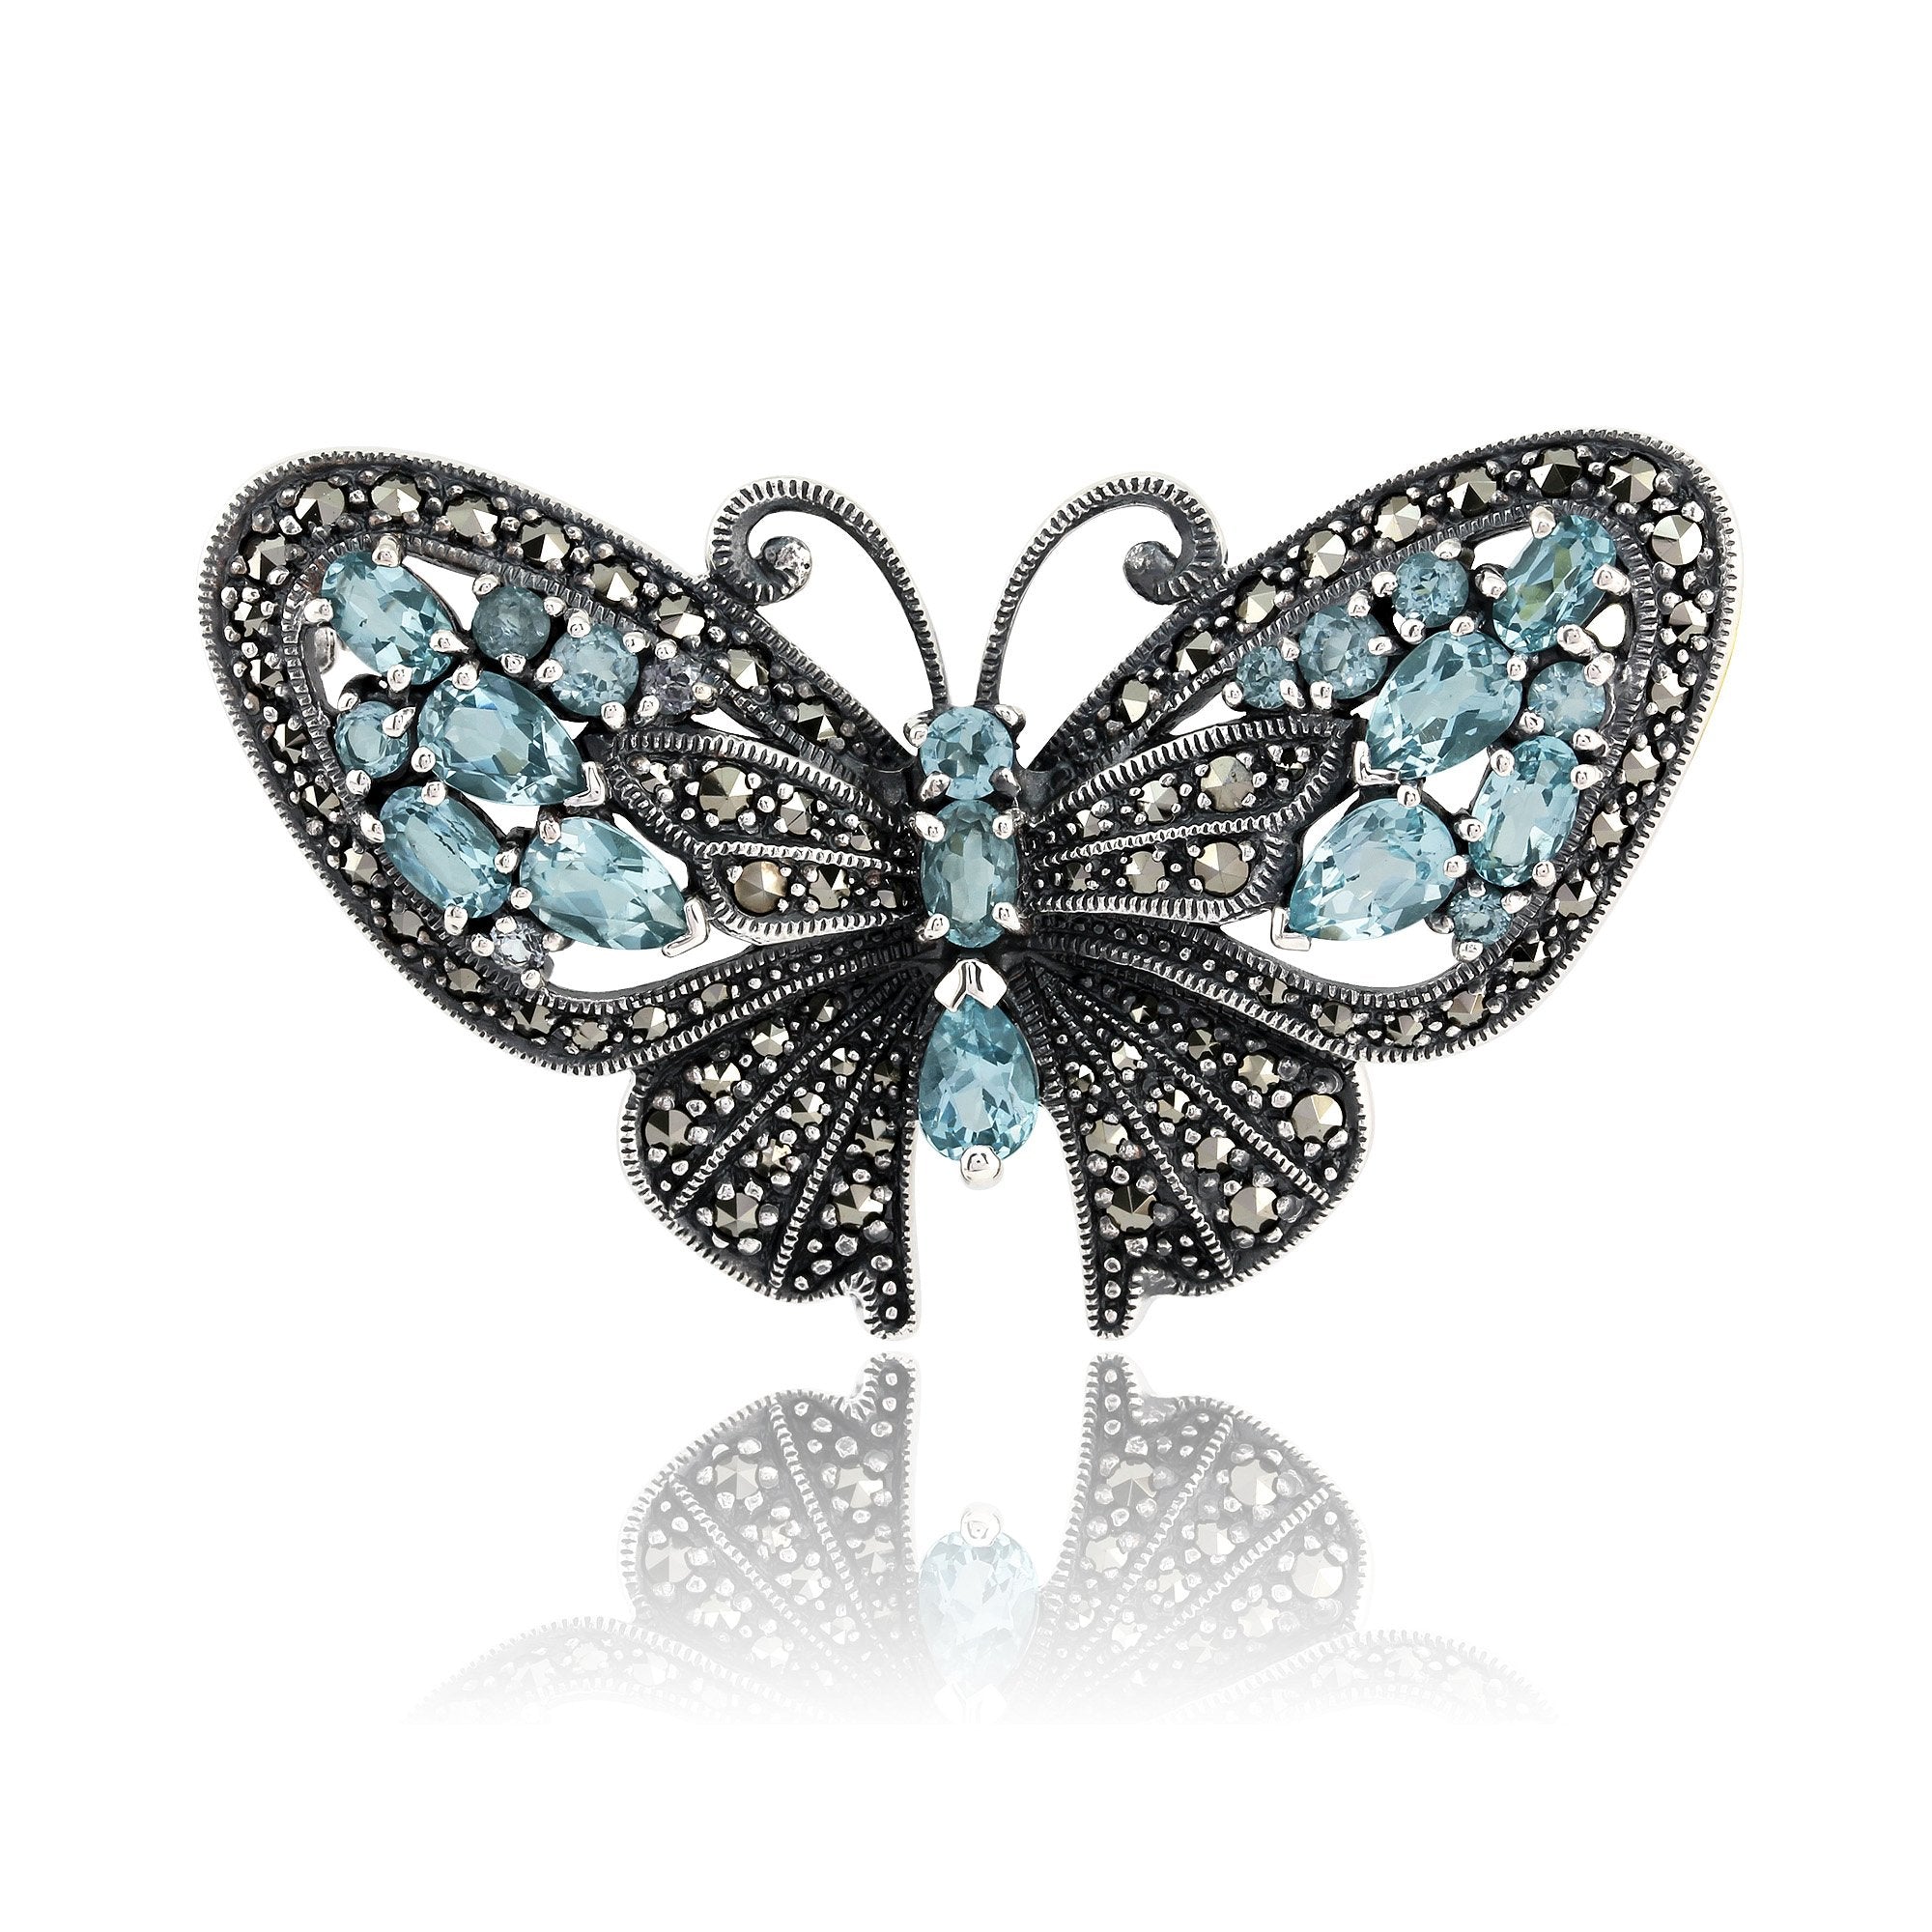 Art Nouveau Style Marquise Blue Topaz & Marcasite Butterfly Brooch in 925 Sterling Silver